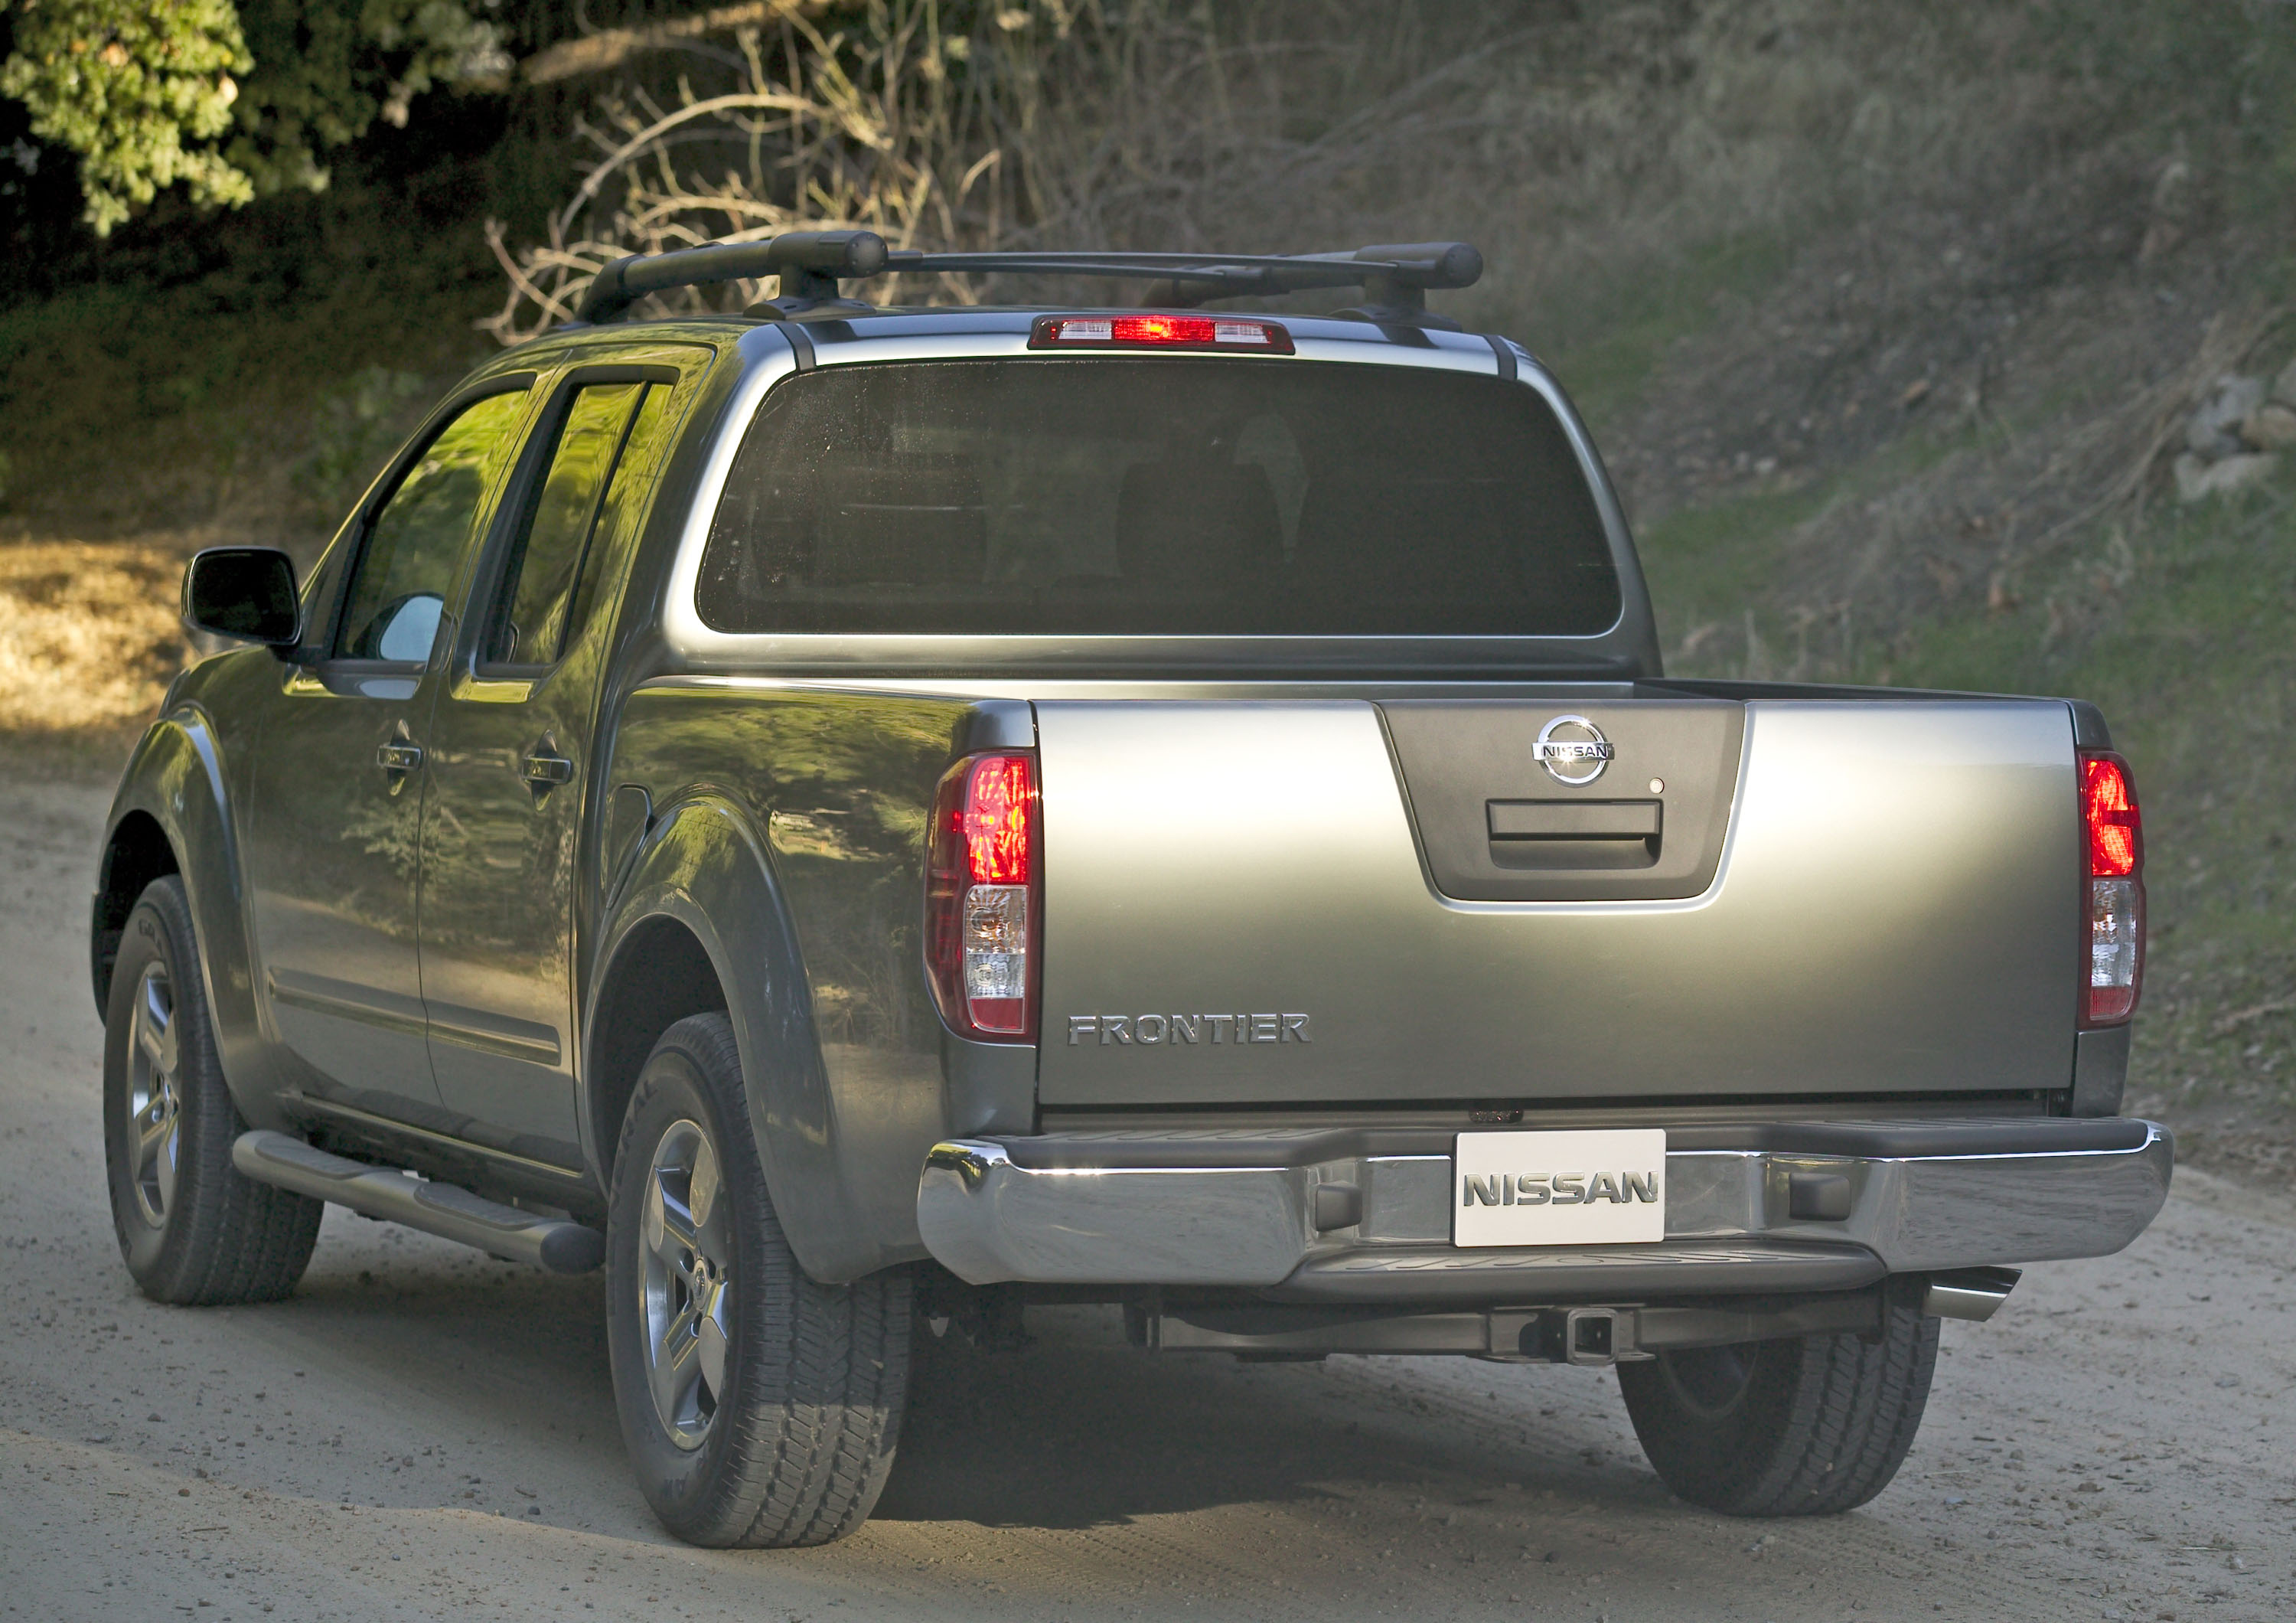 2008 Nissan frontier crew cab owners manual